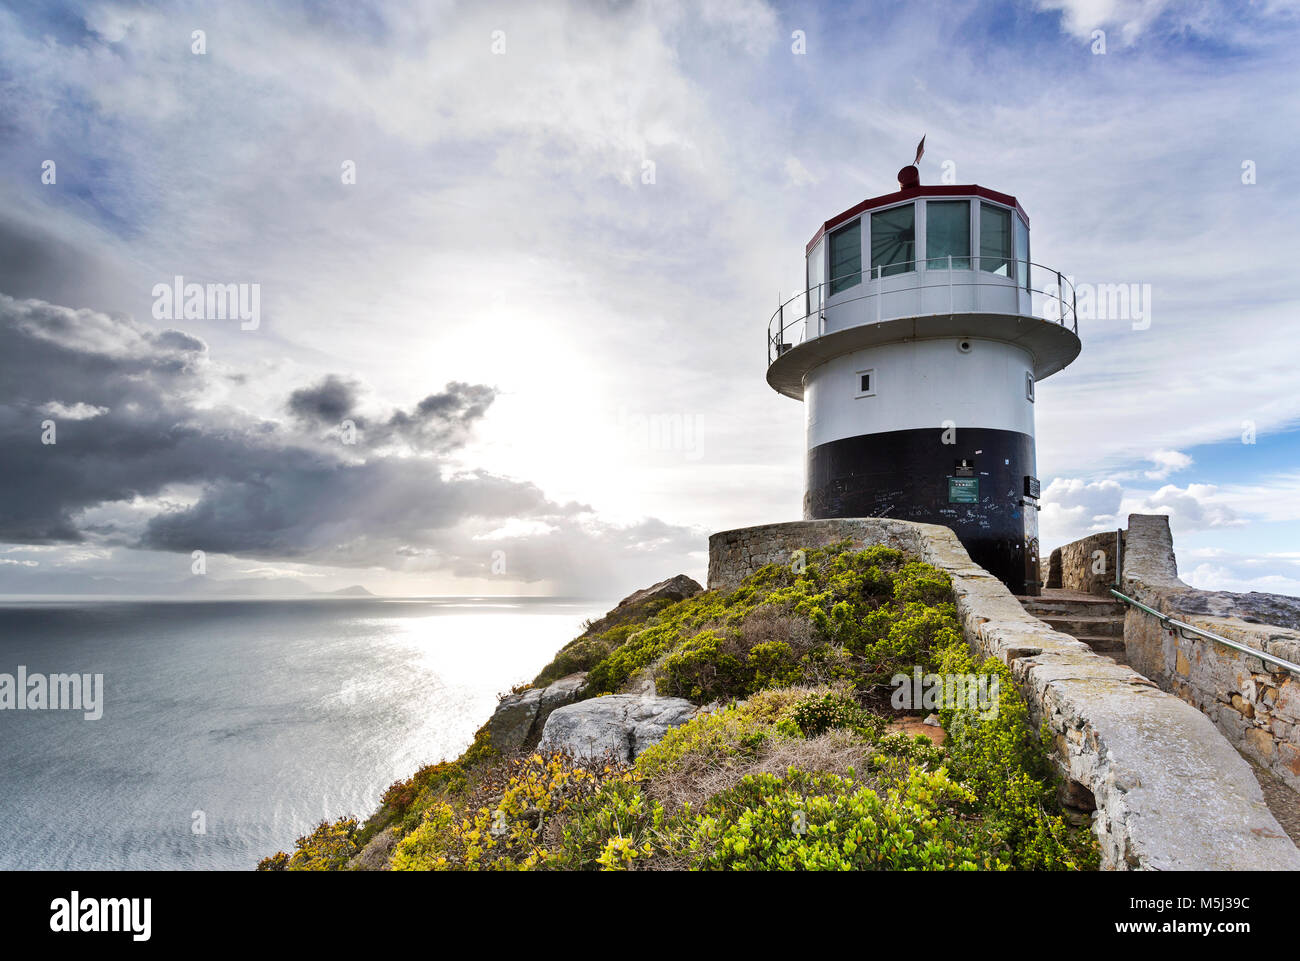 Africa, South Africa, Western Cape, Cape Town, Cape of good hope National Park, Cape Point, lighthouse Stock Photo